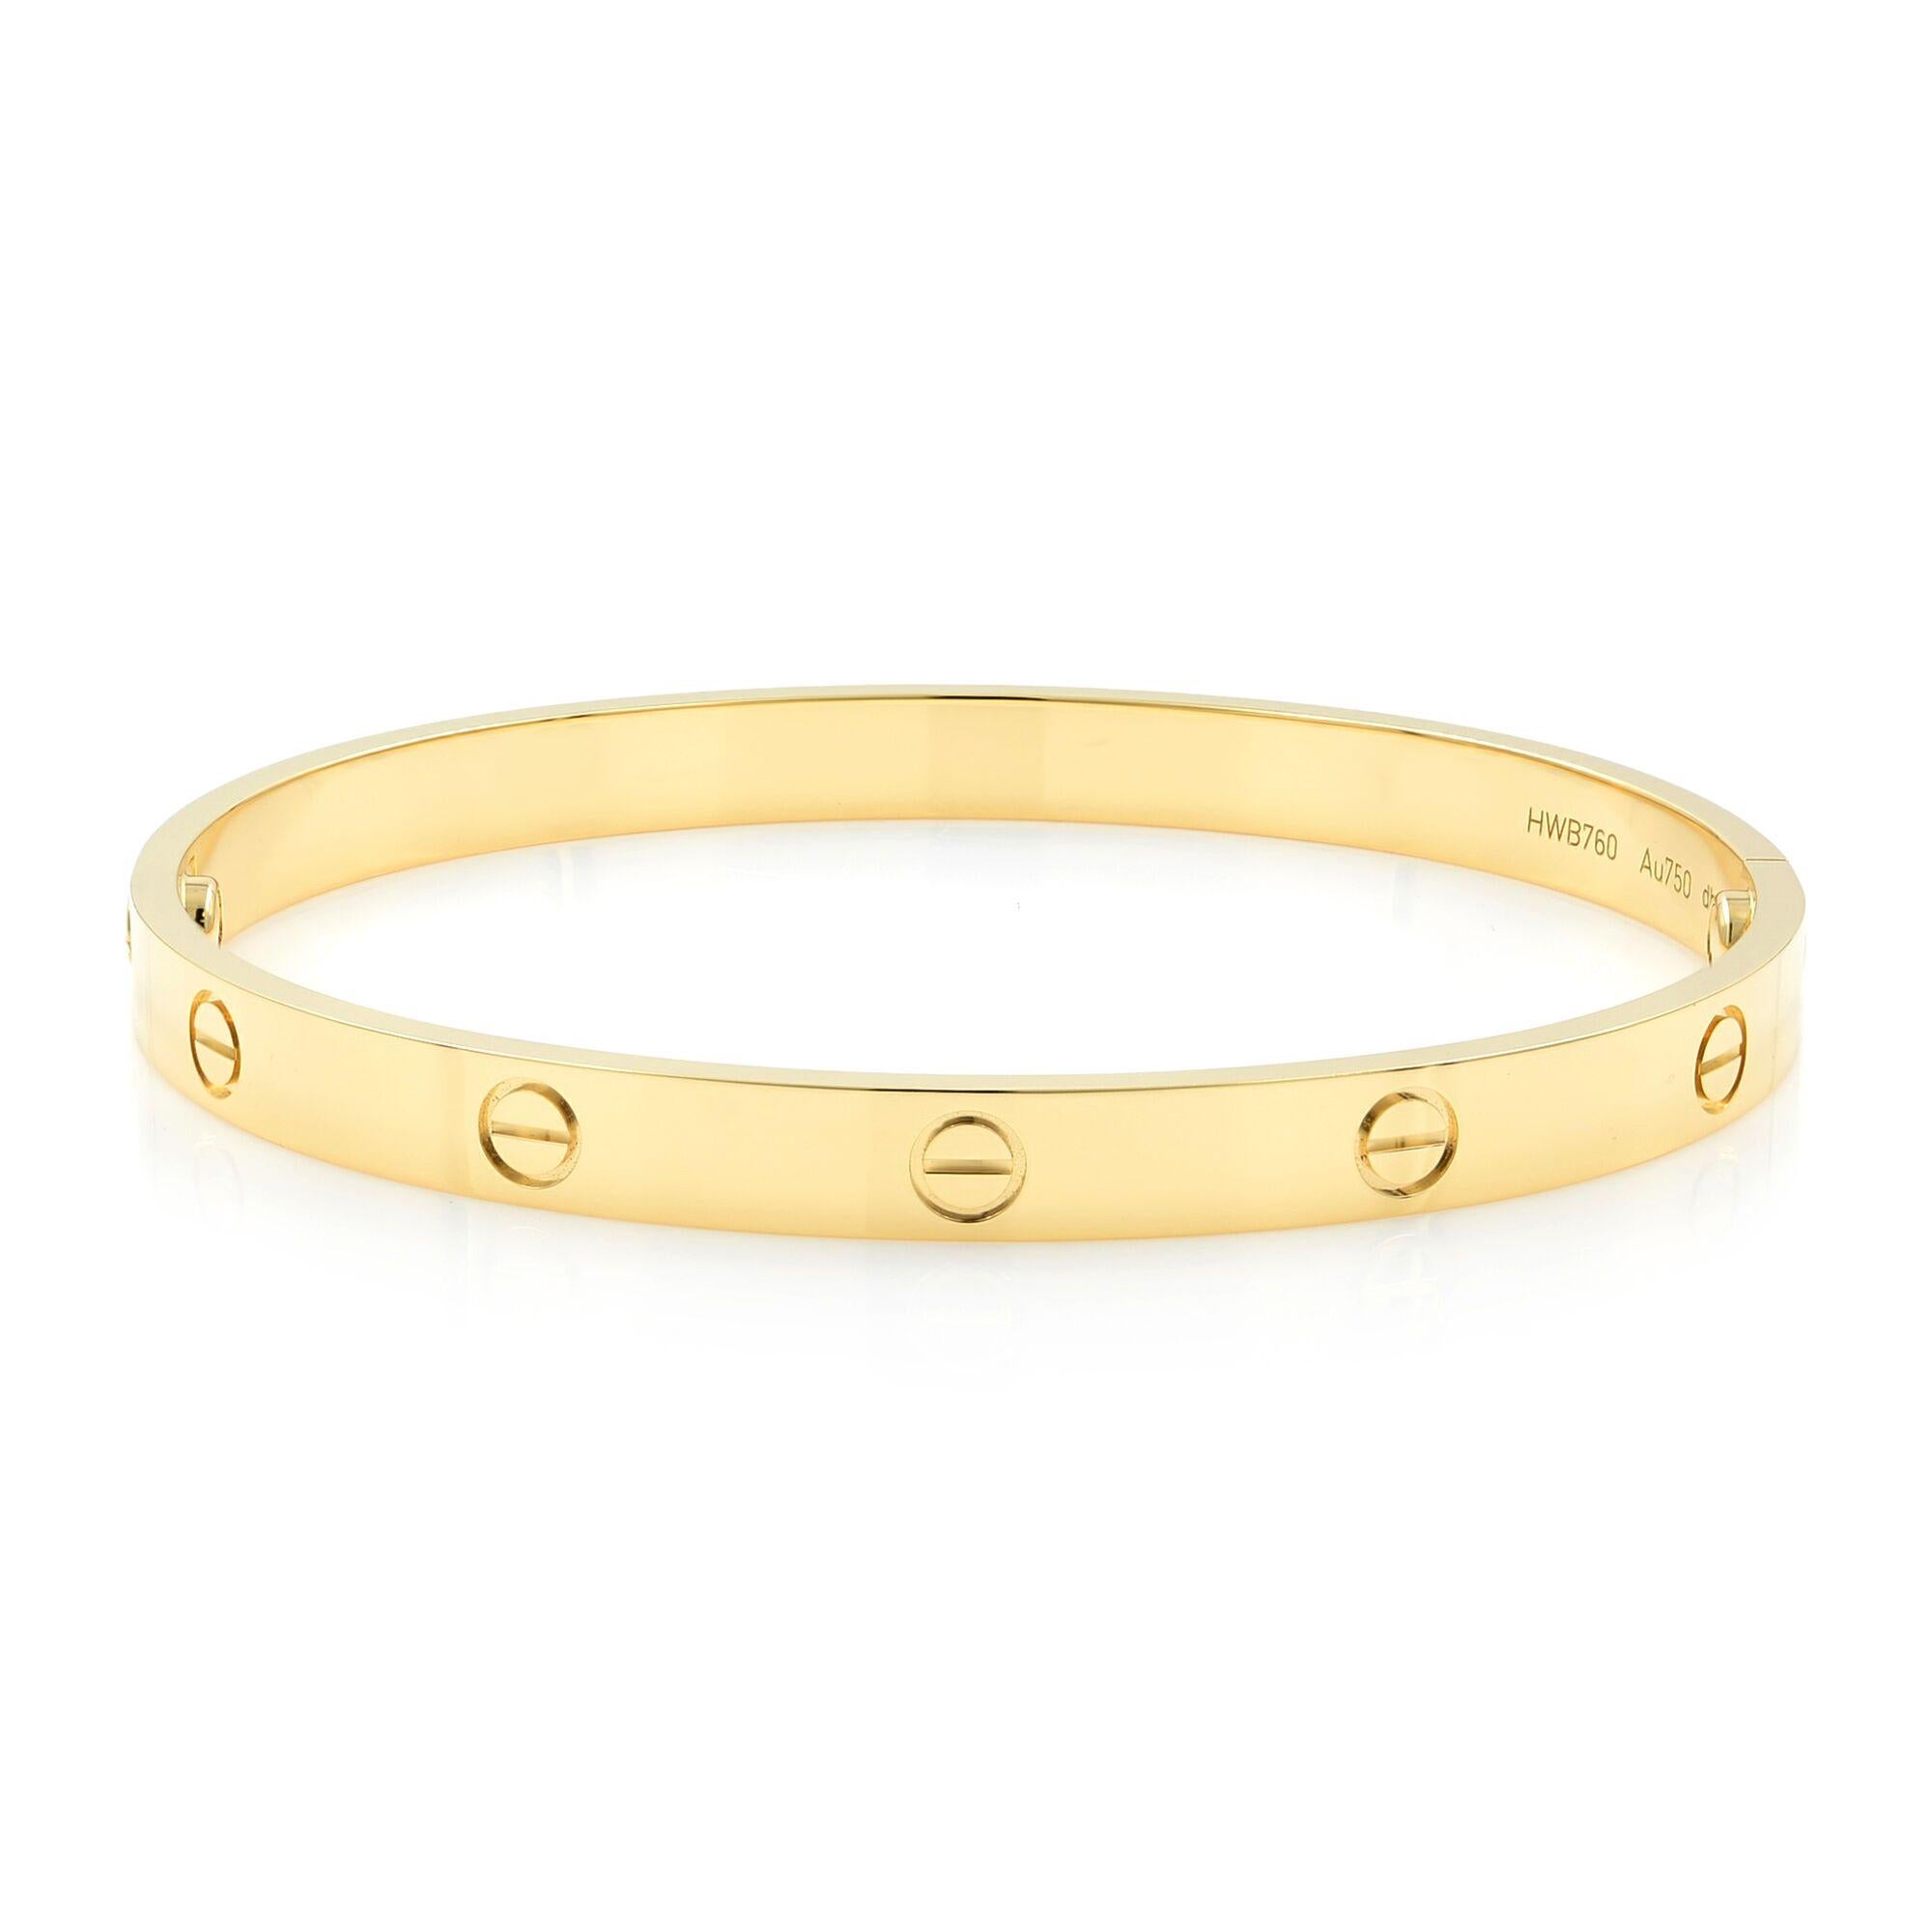 Cartier Love Bracelet Size 20 18K Yellow Gold.
Authentic and beautiful with no signs of wear this bangle is a statement of luxury and class.
Comes with screwdriver and box. (+cartier booklet)
The bracelet is marked 